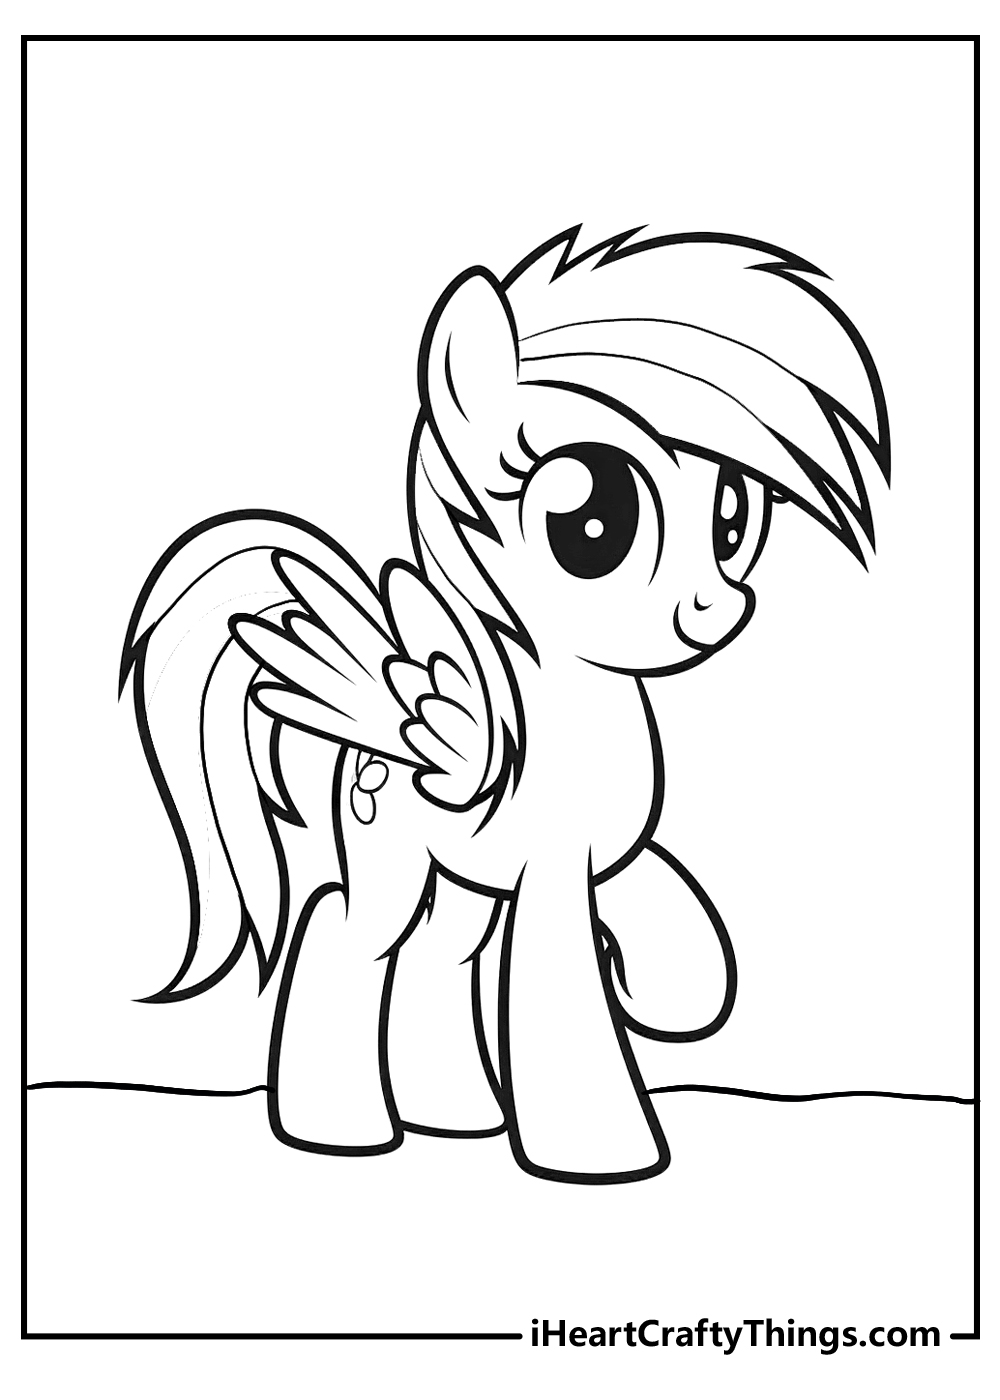 rainbow dash printable coloring pages